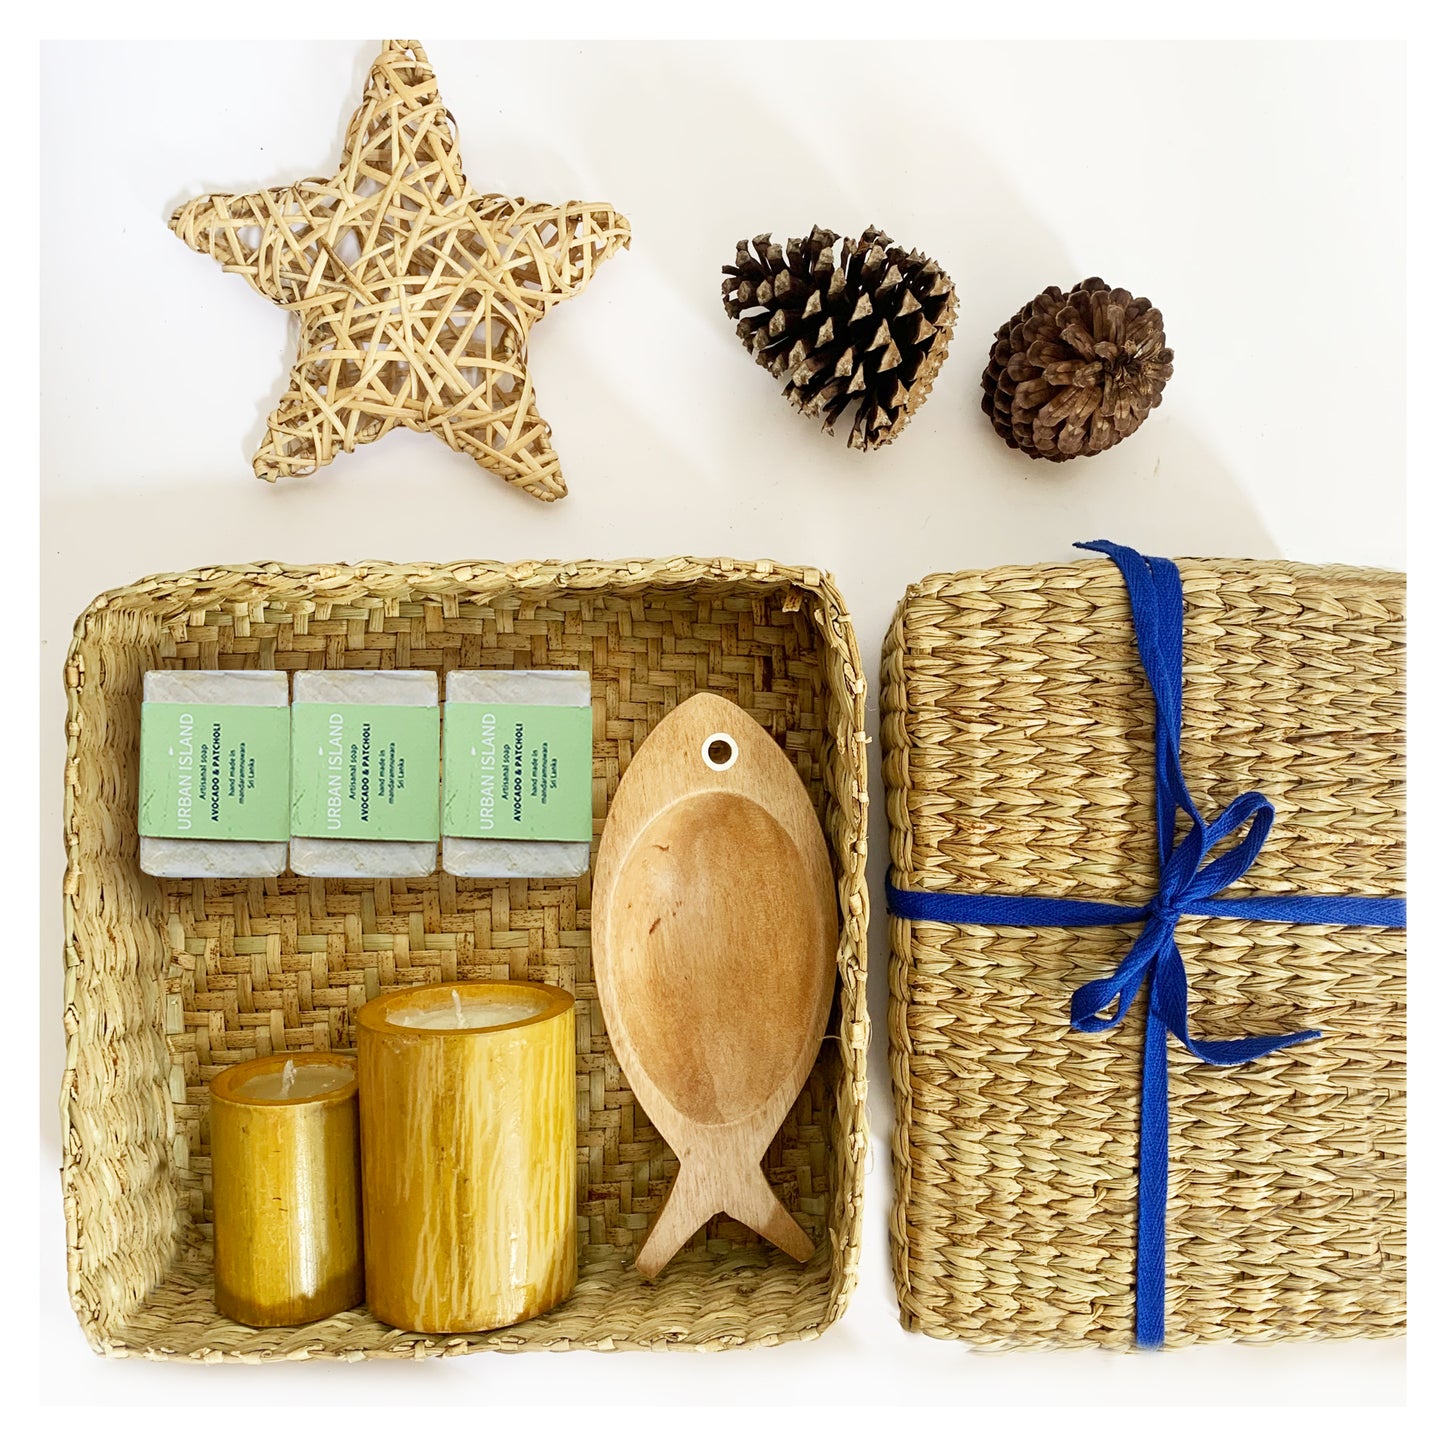 Complete Wellness Gift- 6 hand made soaps , Wooden fish, bamboo and Avocado Soaps